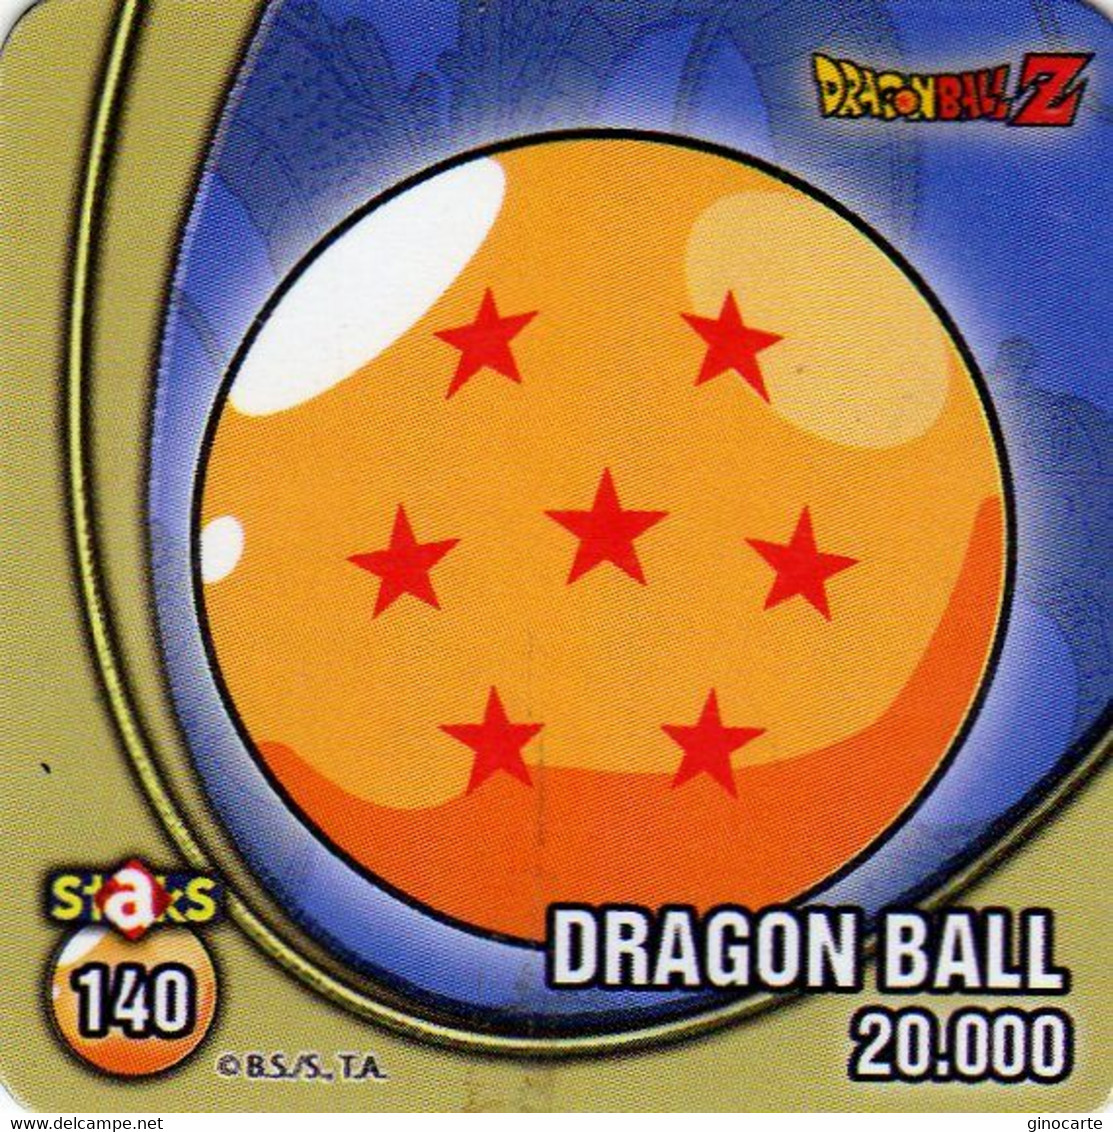 Magnets Magnet Stacks Dragon Ball Dragonball 140 - Personnages